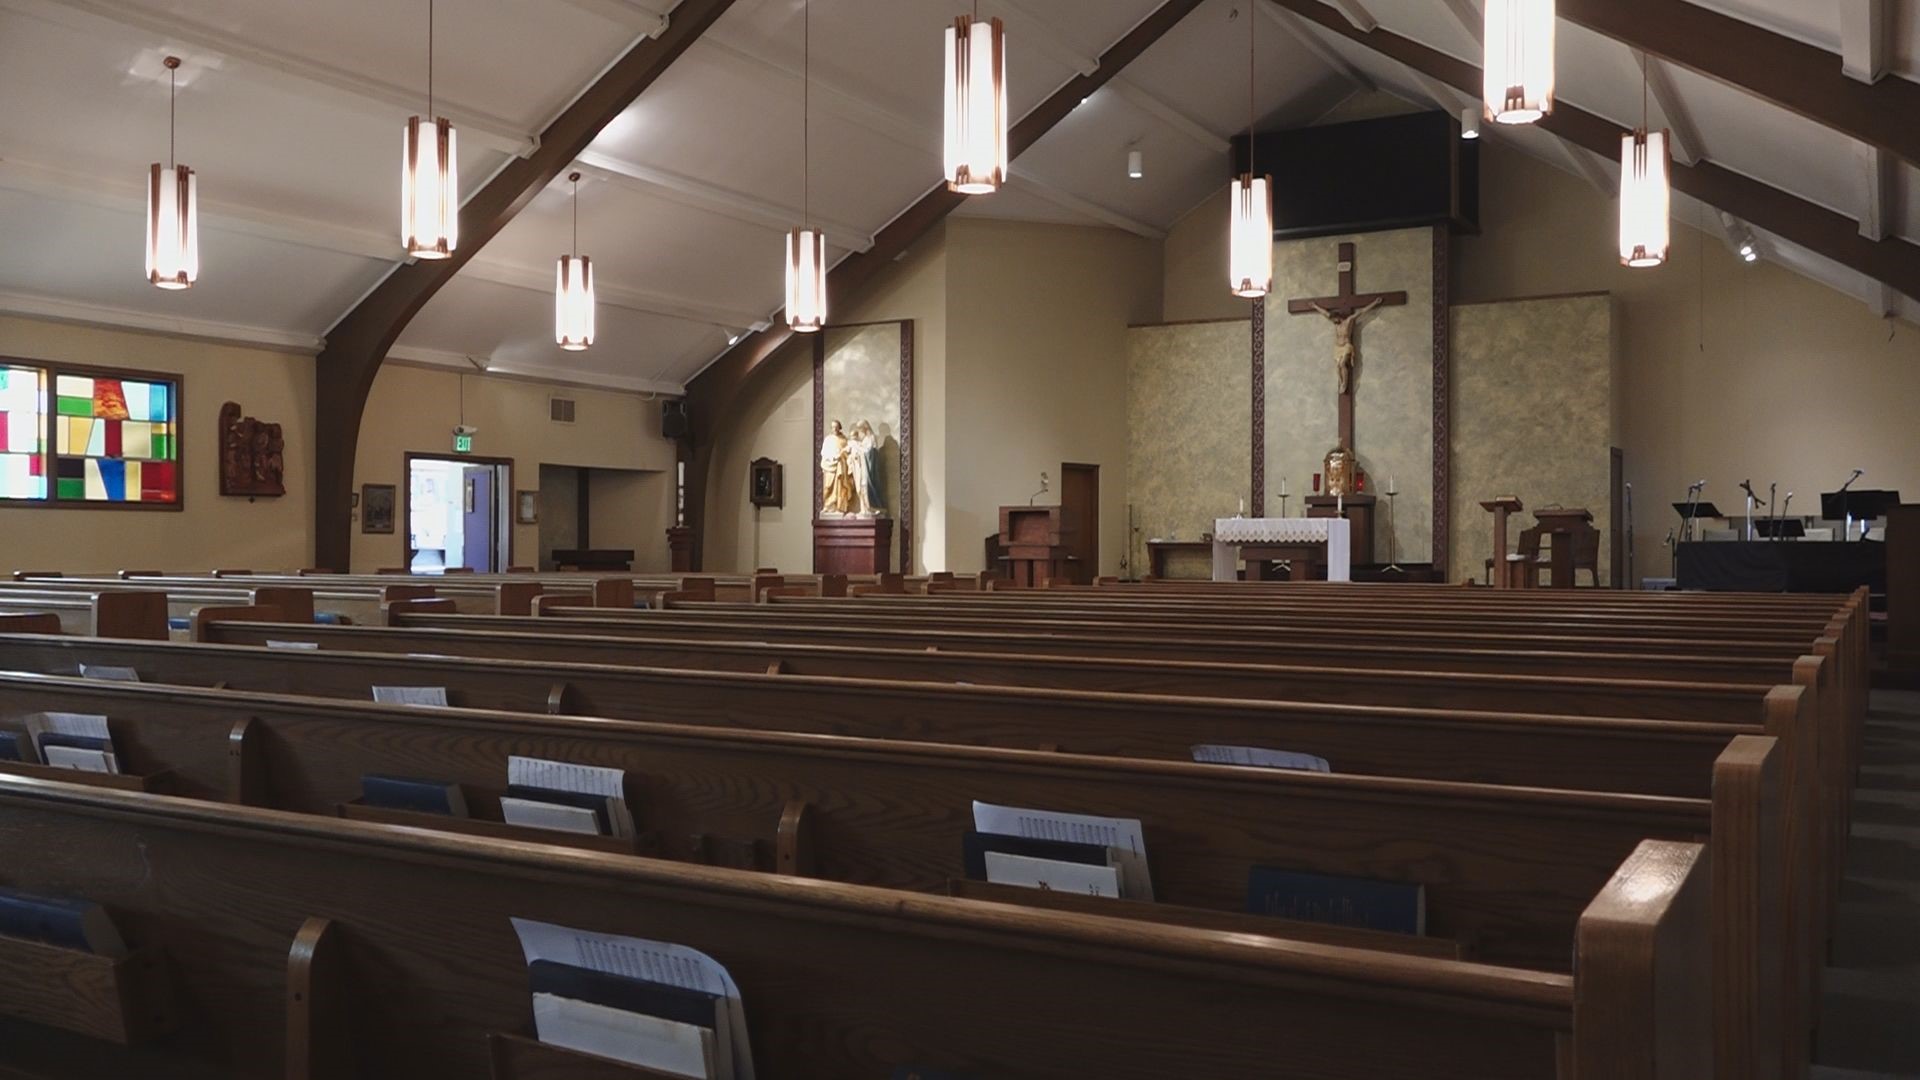 The Diocese of Grand Rapids says the closures are due to a low number of parishioners.